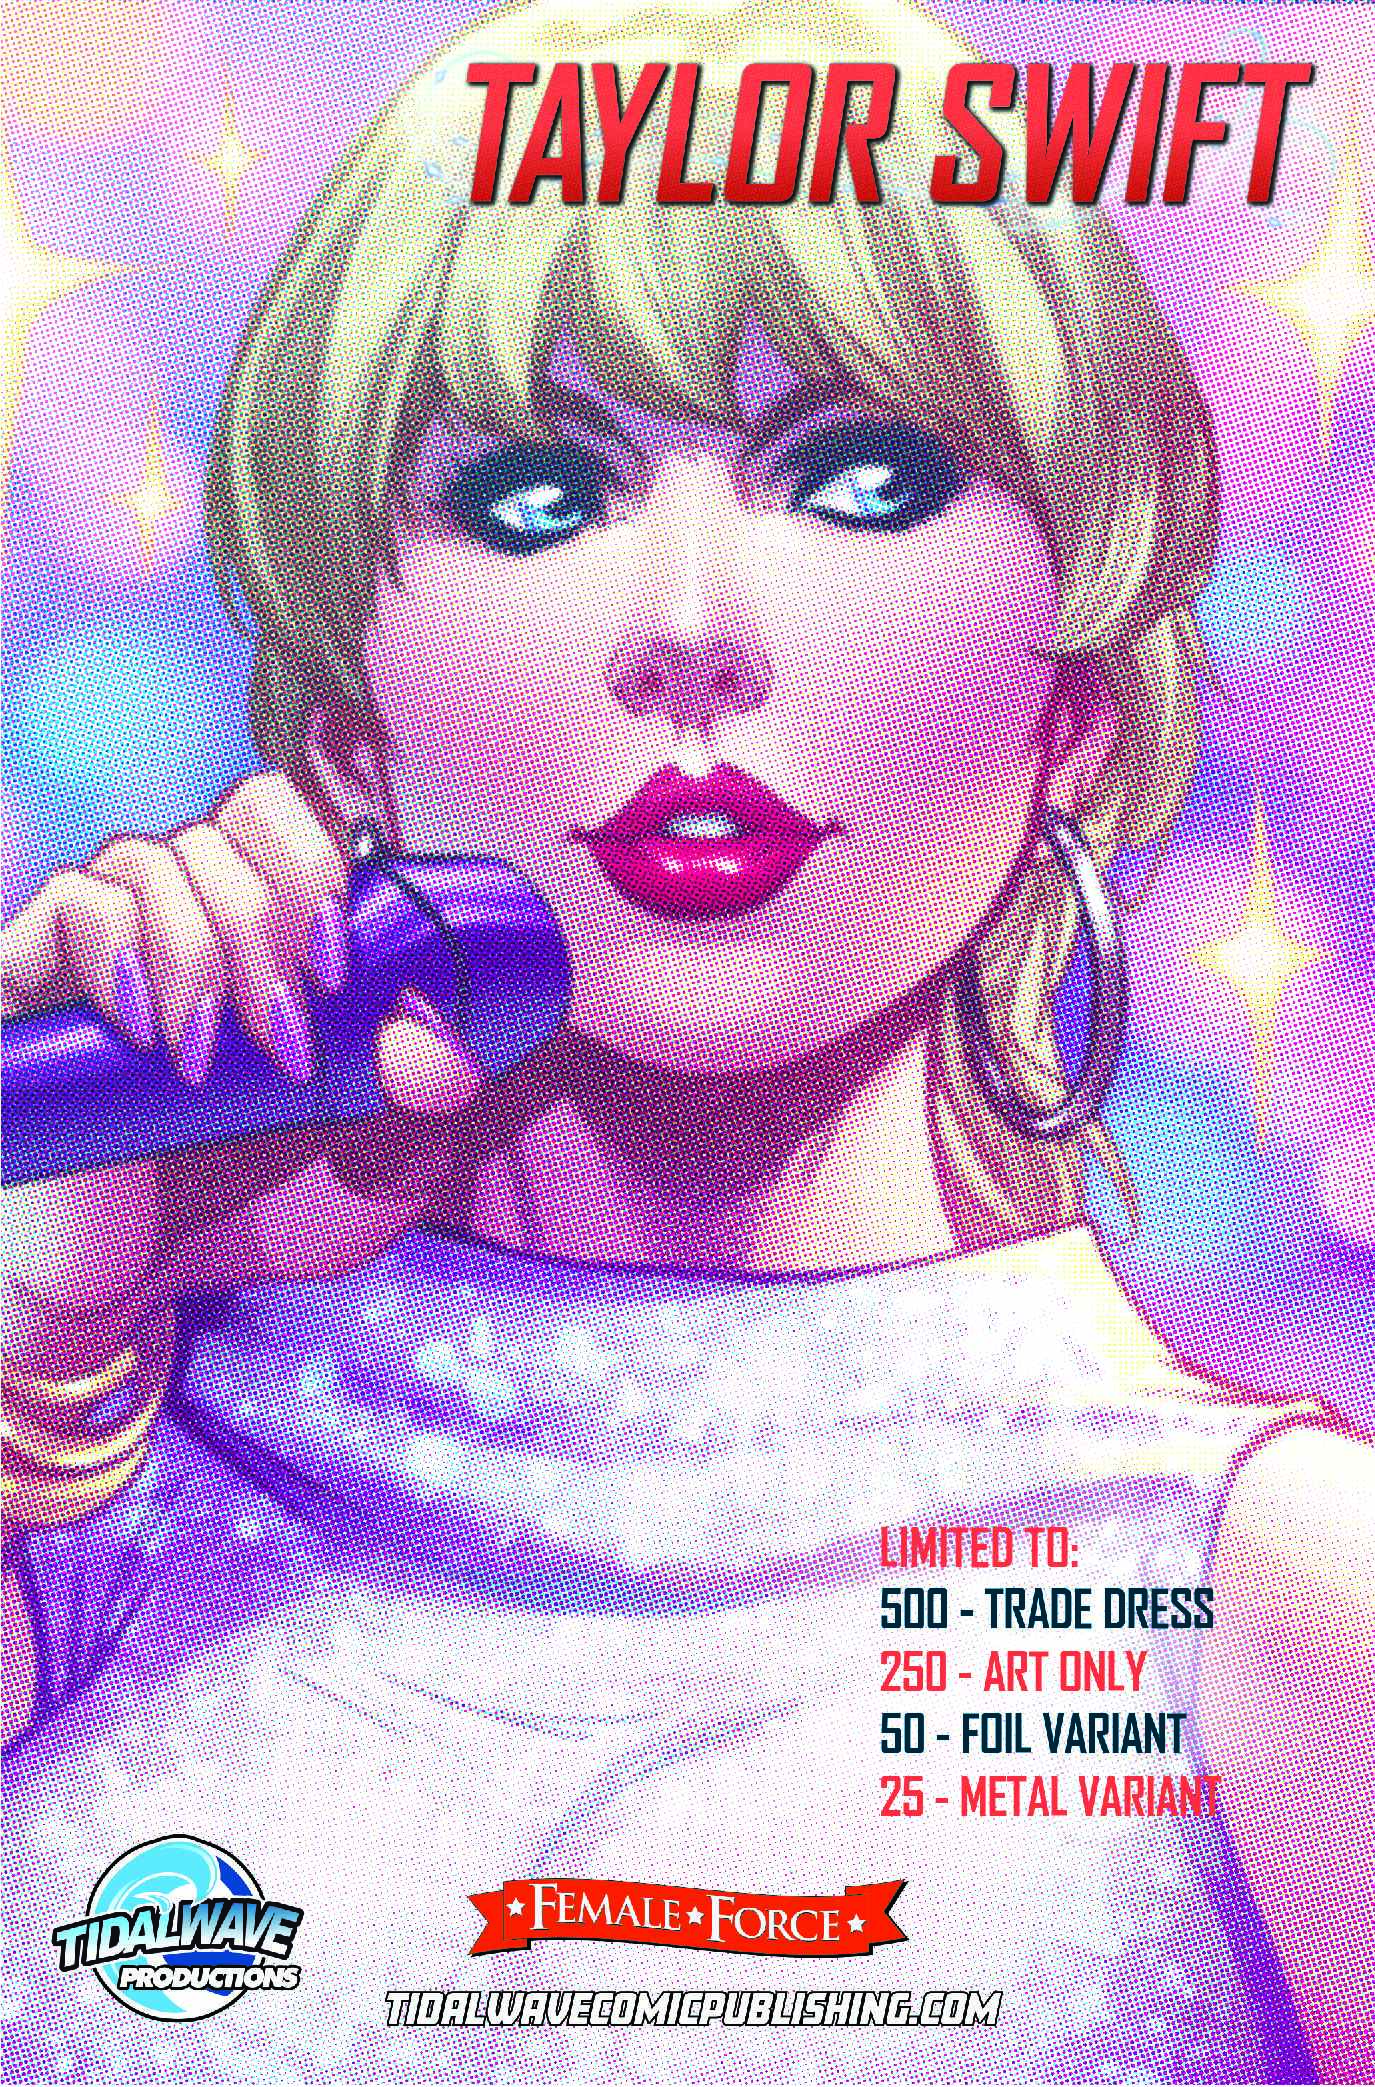 FEMALE FORCE: TAYLOR SWIFT #2 - ALE GARZA ART ONLY - LIMITED TO 250